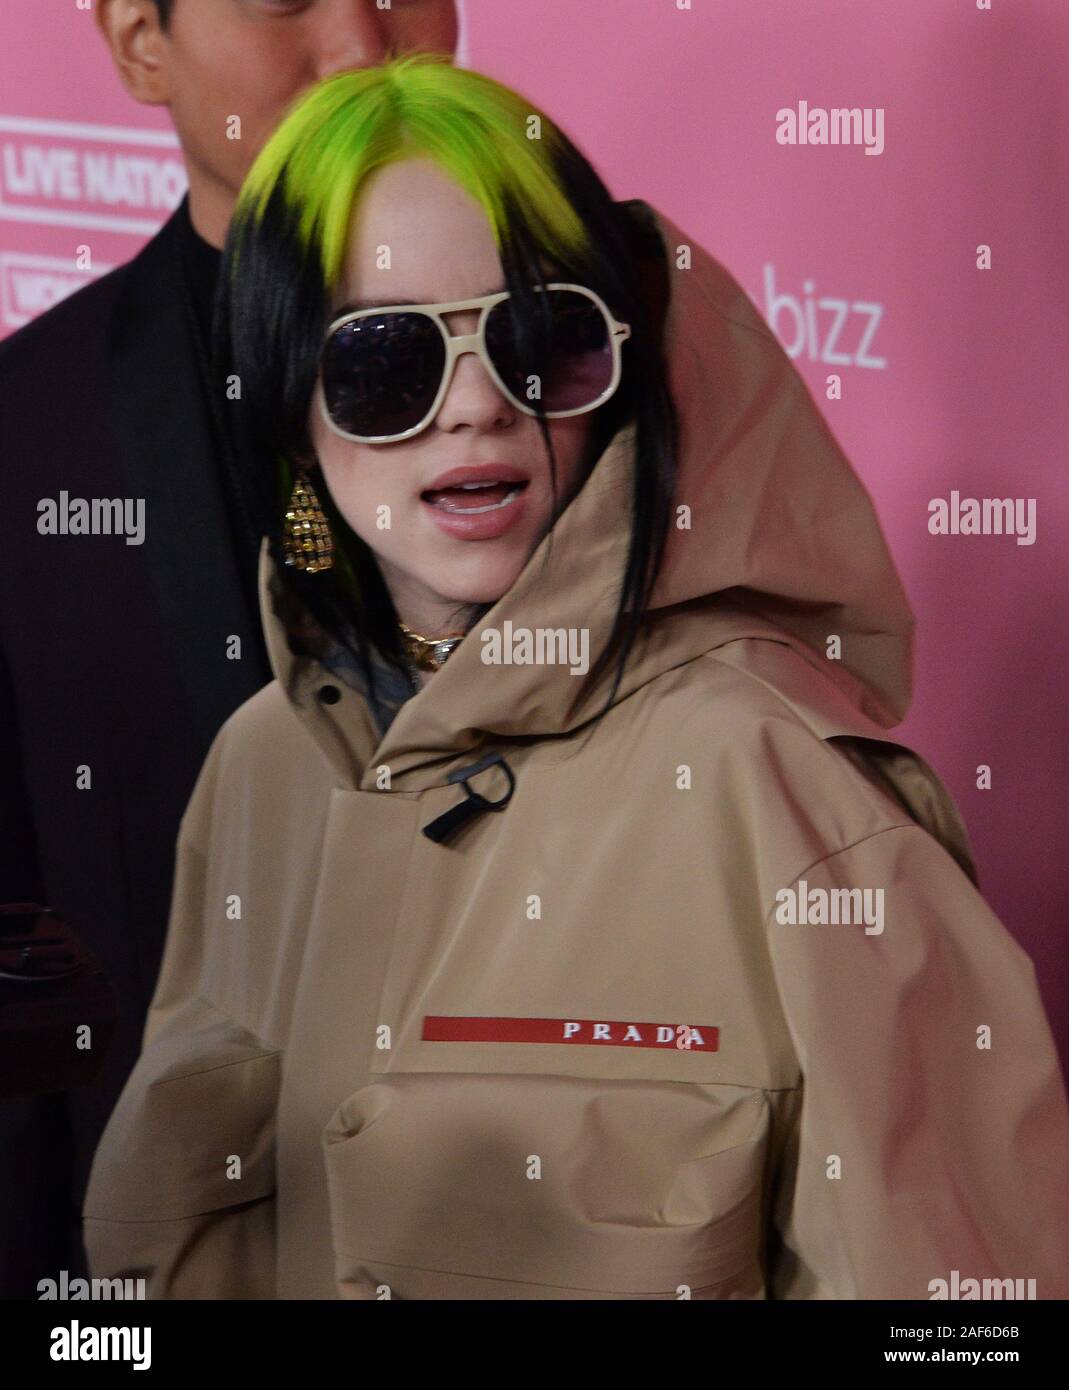 Los Angeles, United States. 13th Dec, 2019. Singer and songwriter Billie Eilish arrives for the 14th annual Billboard Women in Music event at the Hollywood Palladium in Los Angeles on Thursday, December 12, 2019. Taylor Swift became the first-ever recipient of Billboard's Woman of the Decade Award. Alanis Morissette, Nicki Minaj, Brandi Carlile and Roc Nation chief operating officer Desiree Perez were also honored at the gathering. Photo by Jim Ruymen/UPI Credit: UPI/Alamy Live News Stock Photo